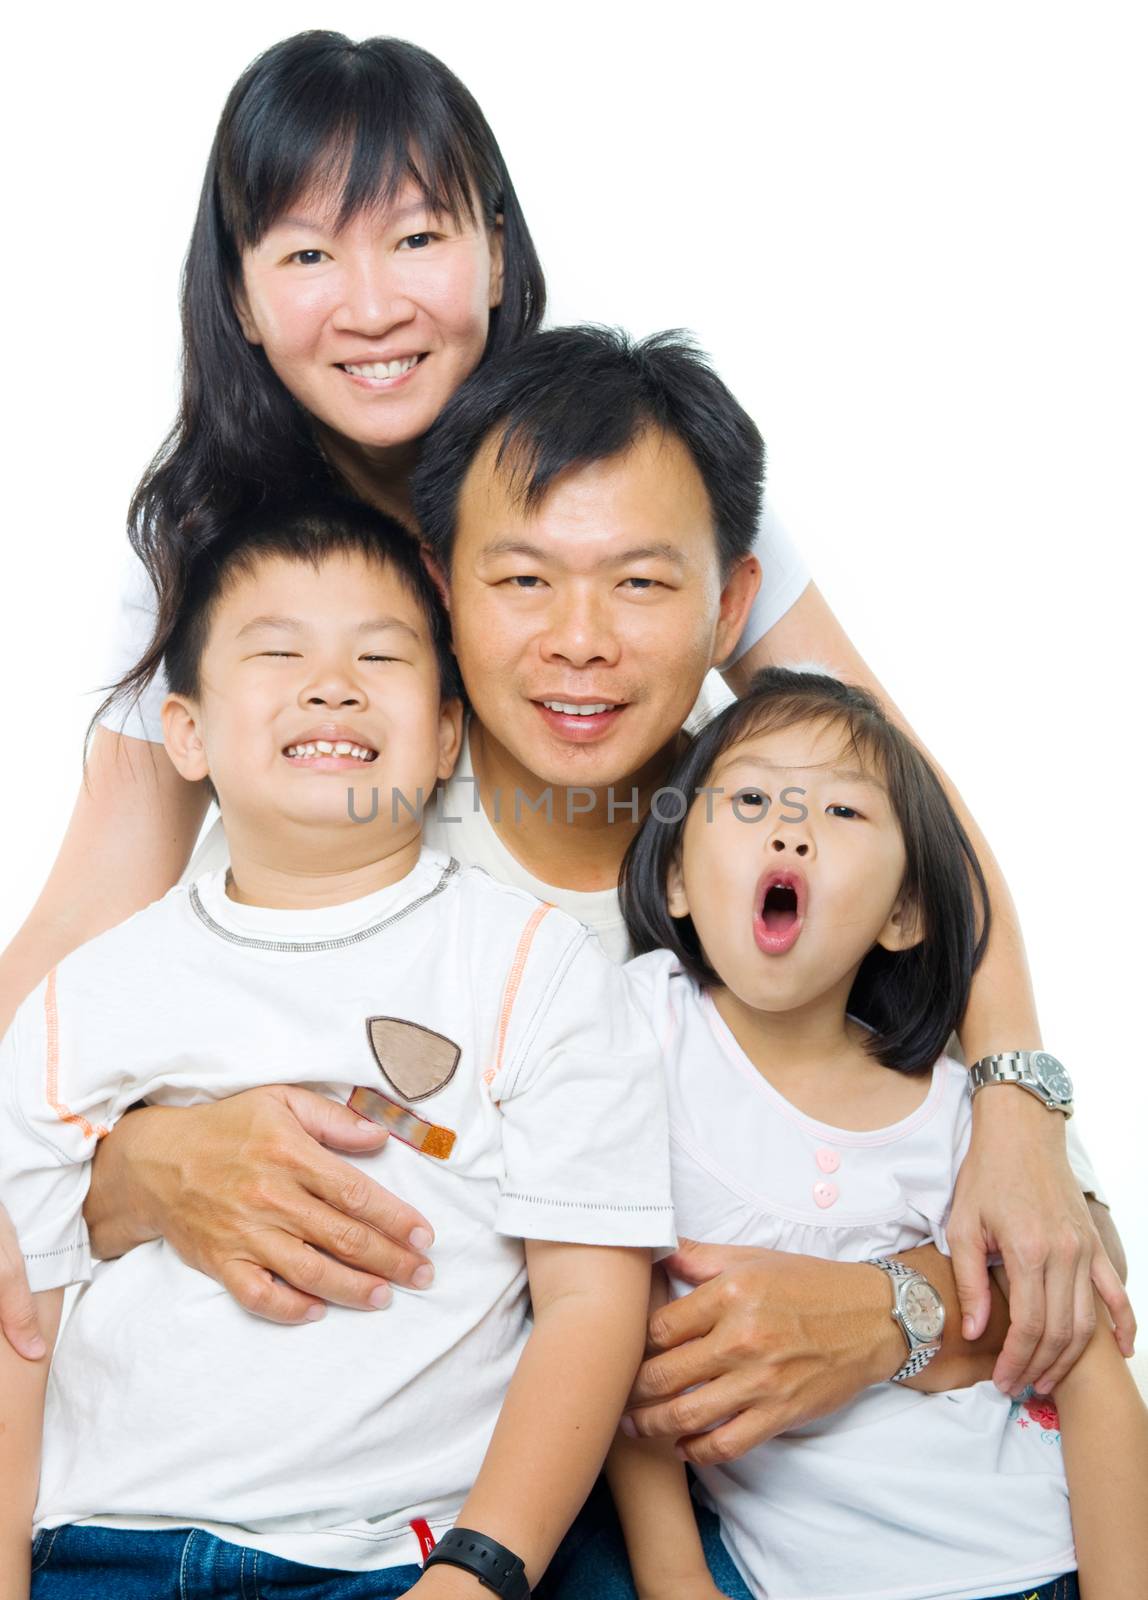 Asian family portrait, happy parents and children, isolated on white background.